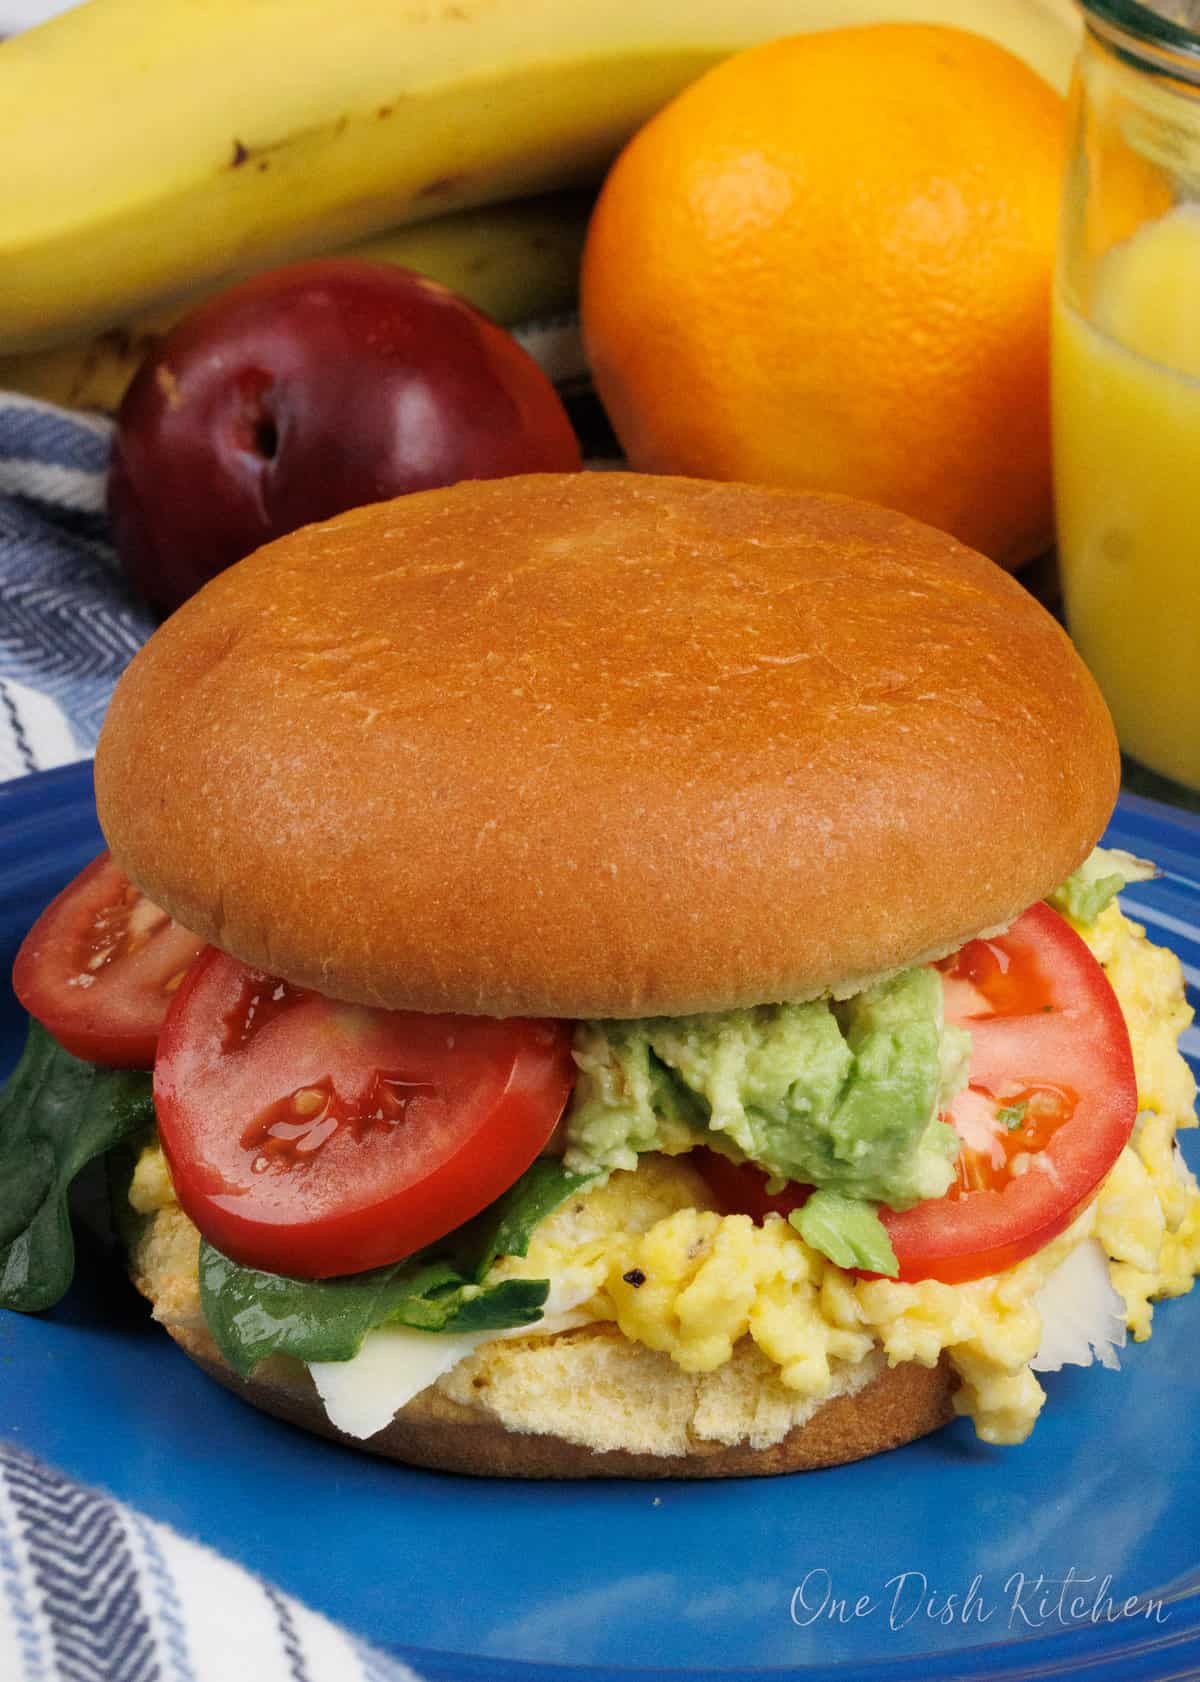 a bun filled with eggs, tomatoes, and an avocado on a blue plate next to a bowl of fruit and a glass of orange juice